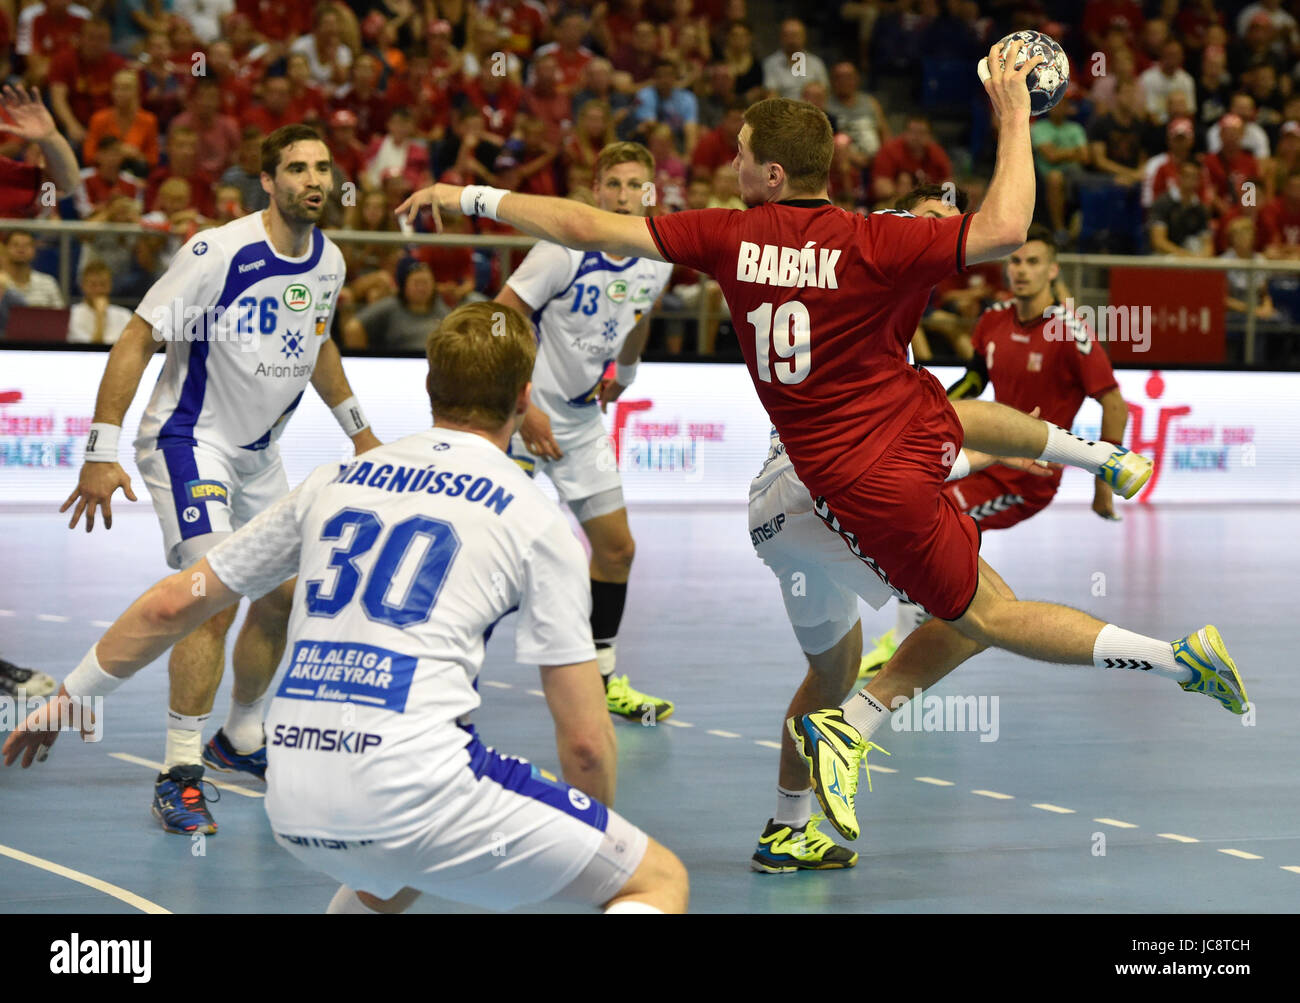 Brno, Czech Republic. 14th June, 2017. From right Czech TOMAS BABAK and OLAFUR ANDRES GUDMUNDSSON, OMAR INGI MAGNUSSON all of Iceland in action during the Qualifier of European Men's Handball Championship: Czech Republic vs Iceland in Brno, Czech Republic, June 14, 2017. Credit: Vaclav Salek/CTK Photo/Alamy Live News Stock Photo